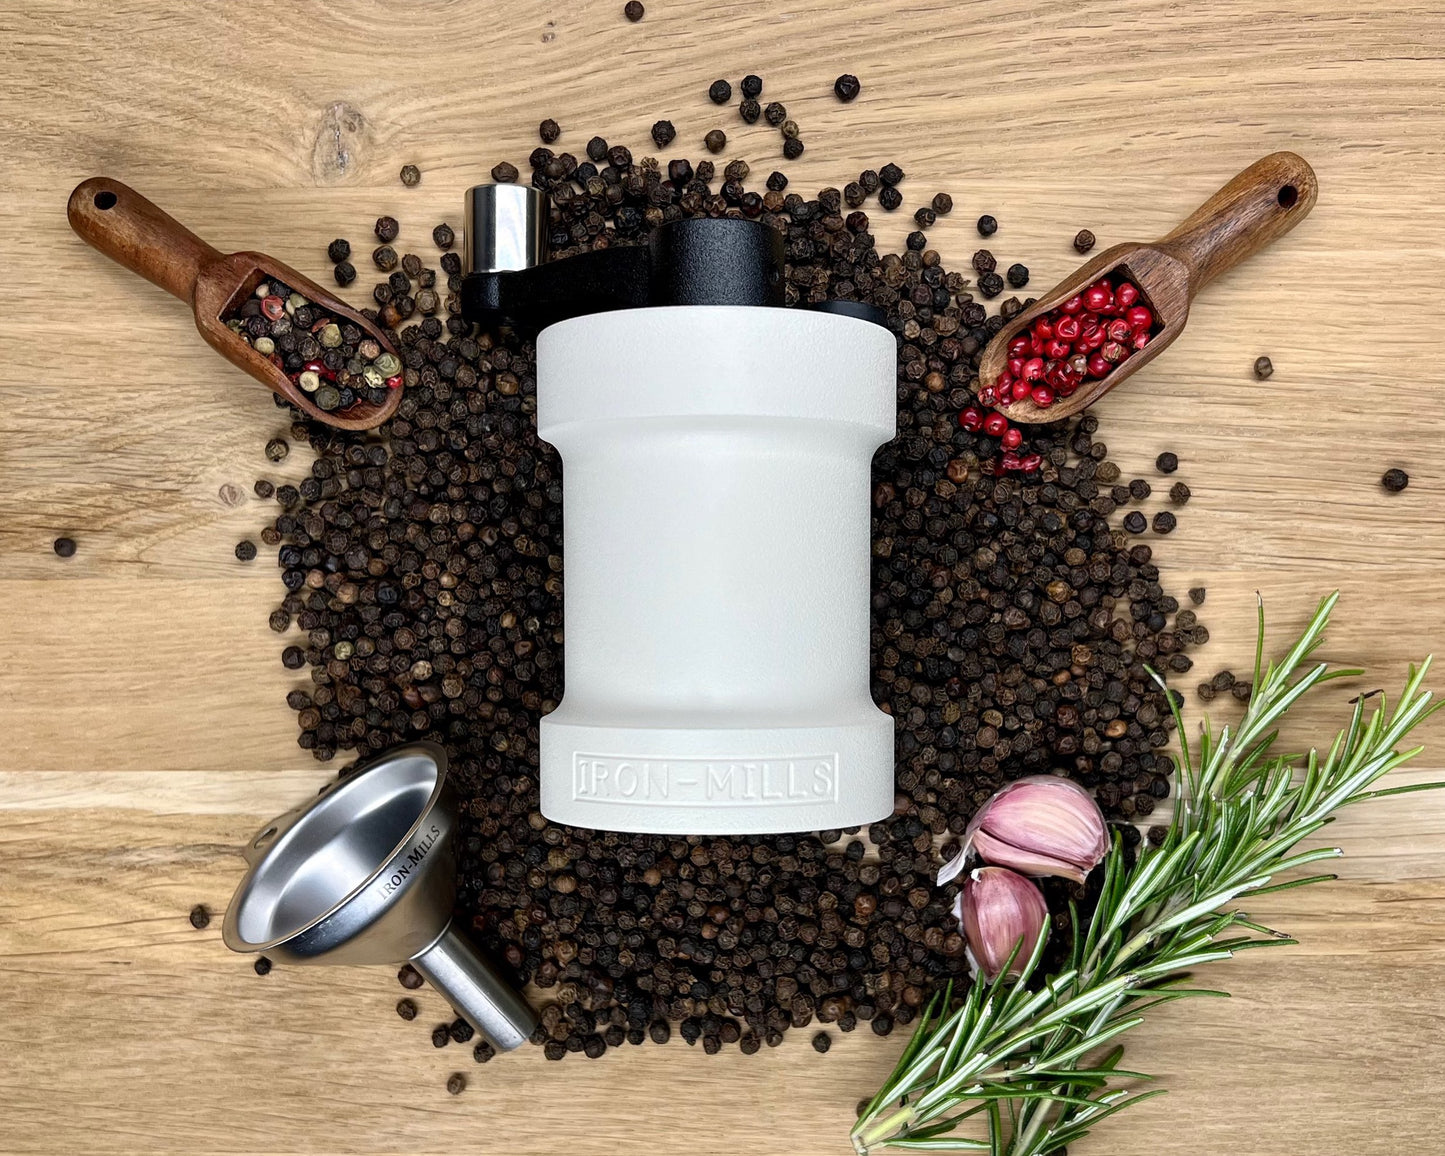 The Oyster White Pepper Mill By Iron-Mills on a Bed of Mixed Pepper Corns